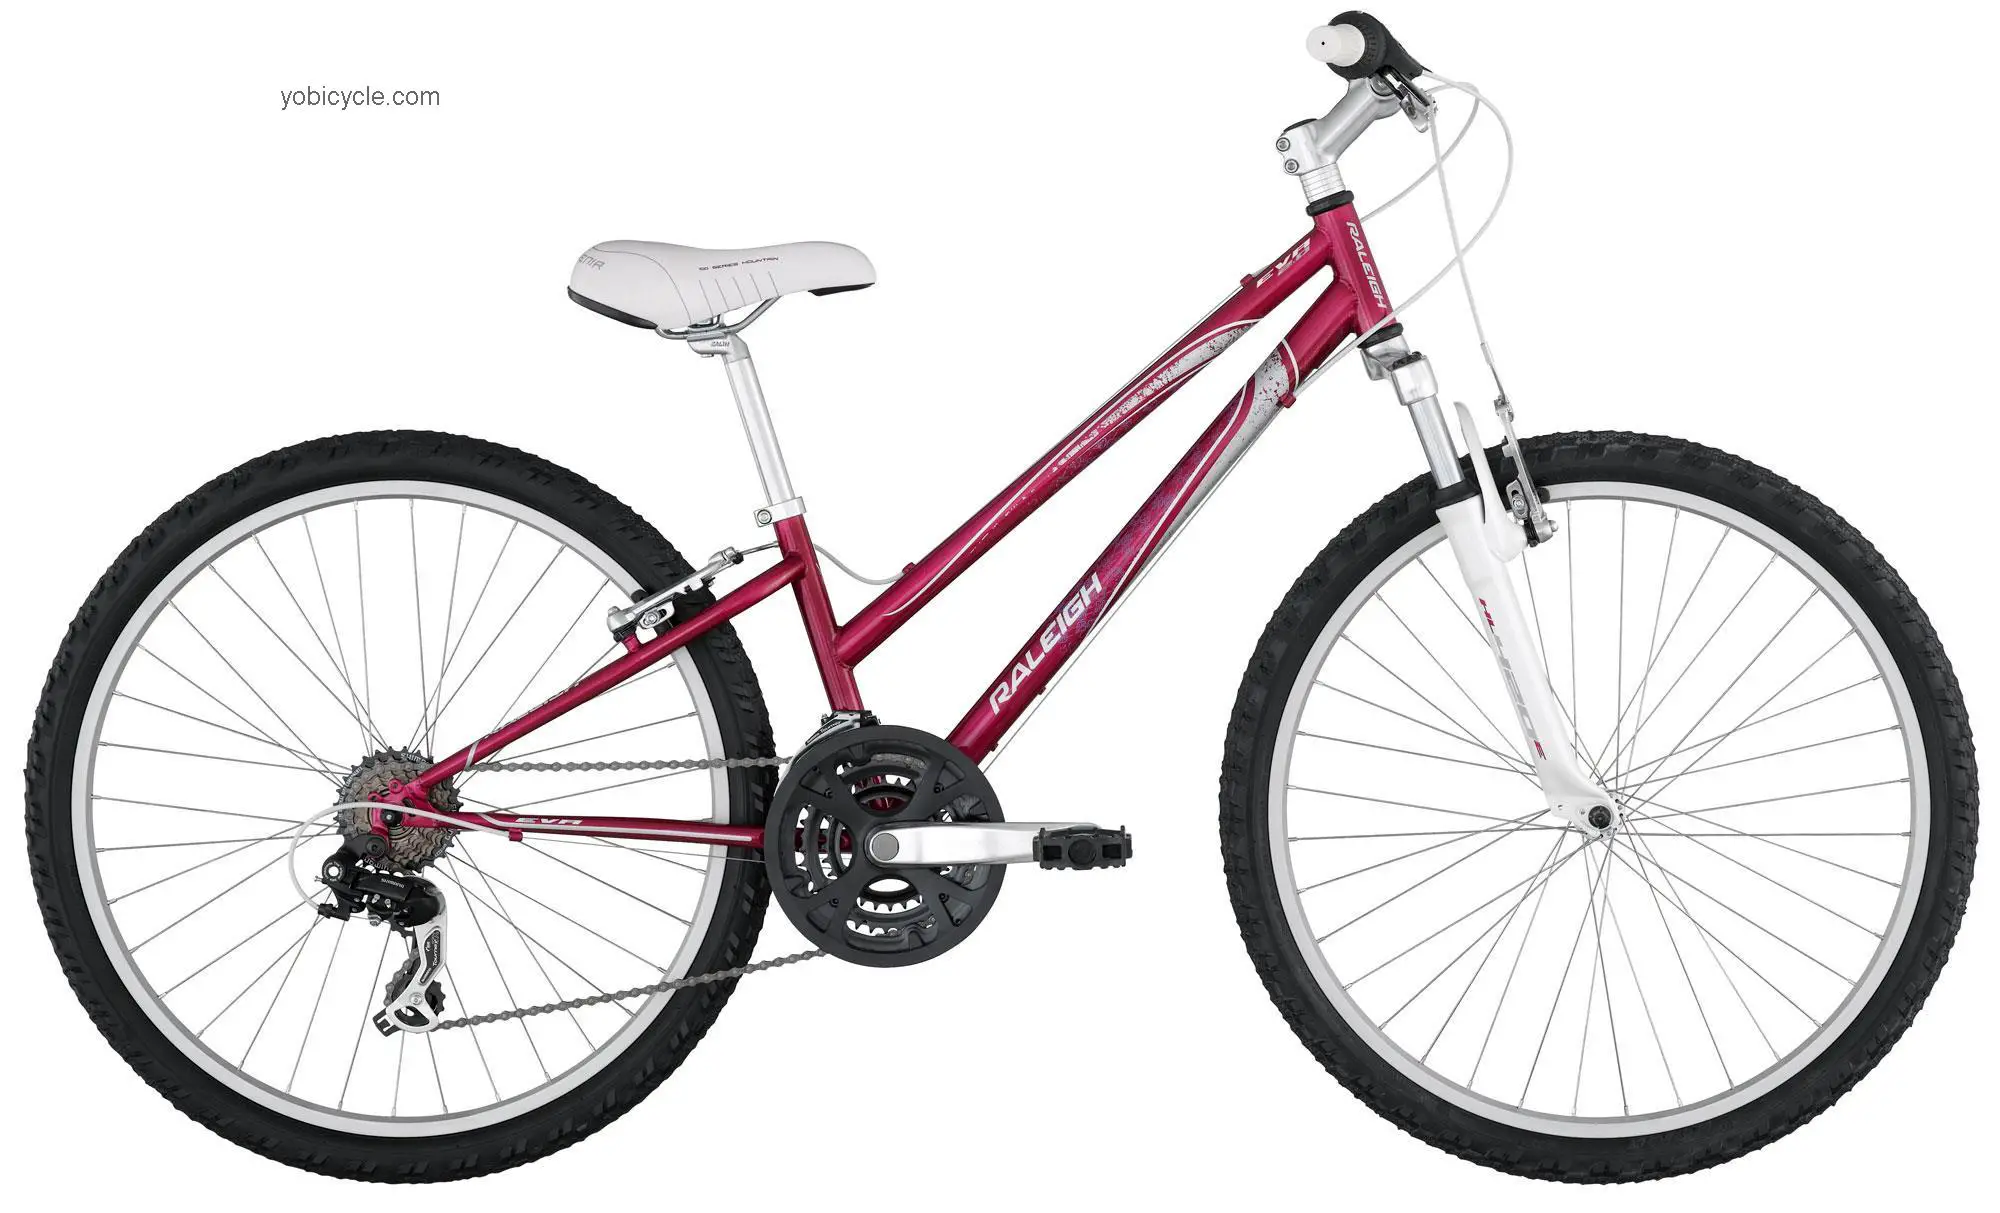 Raleigh Eva 2.0 2012 comparison online with competitors